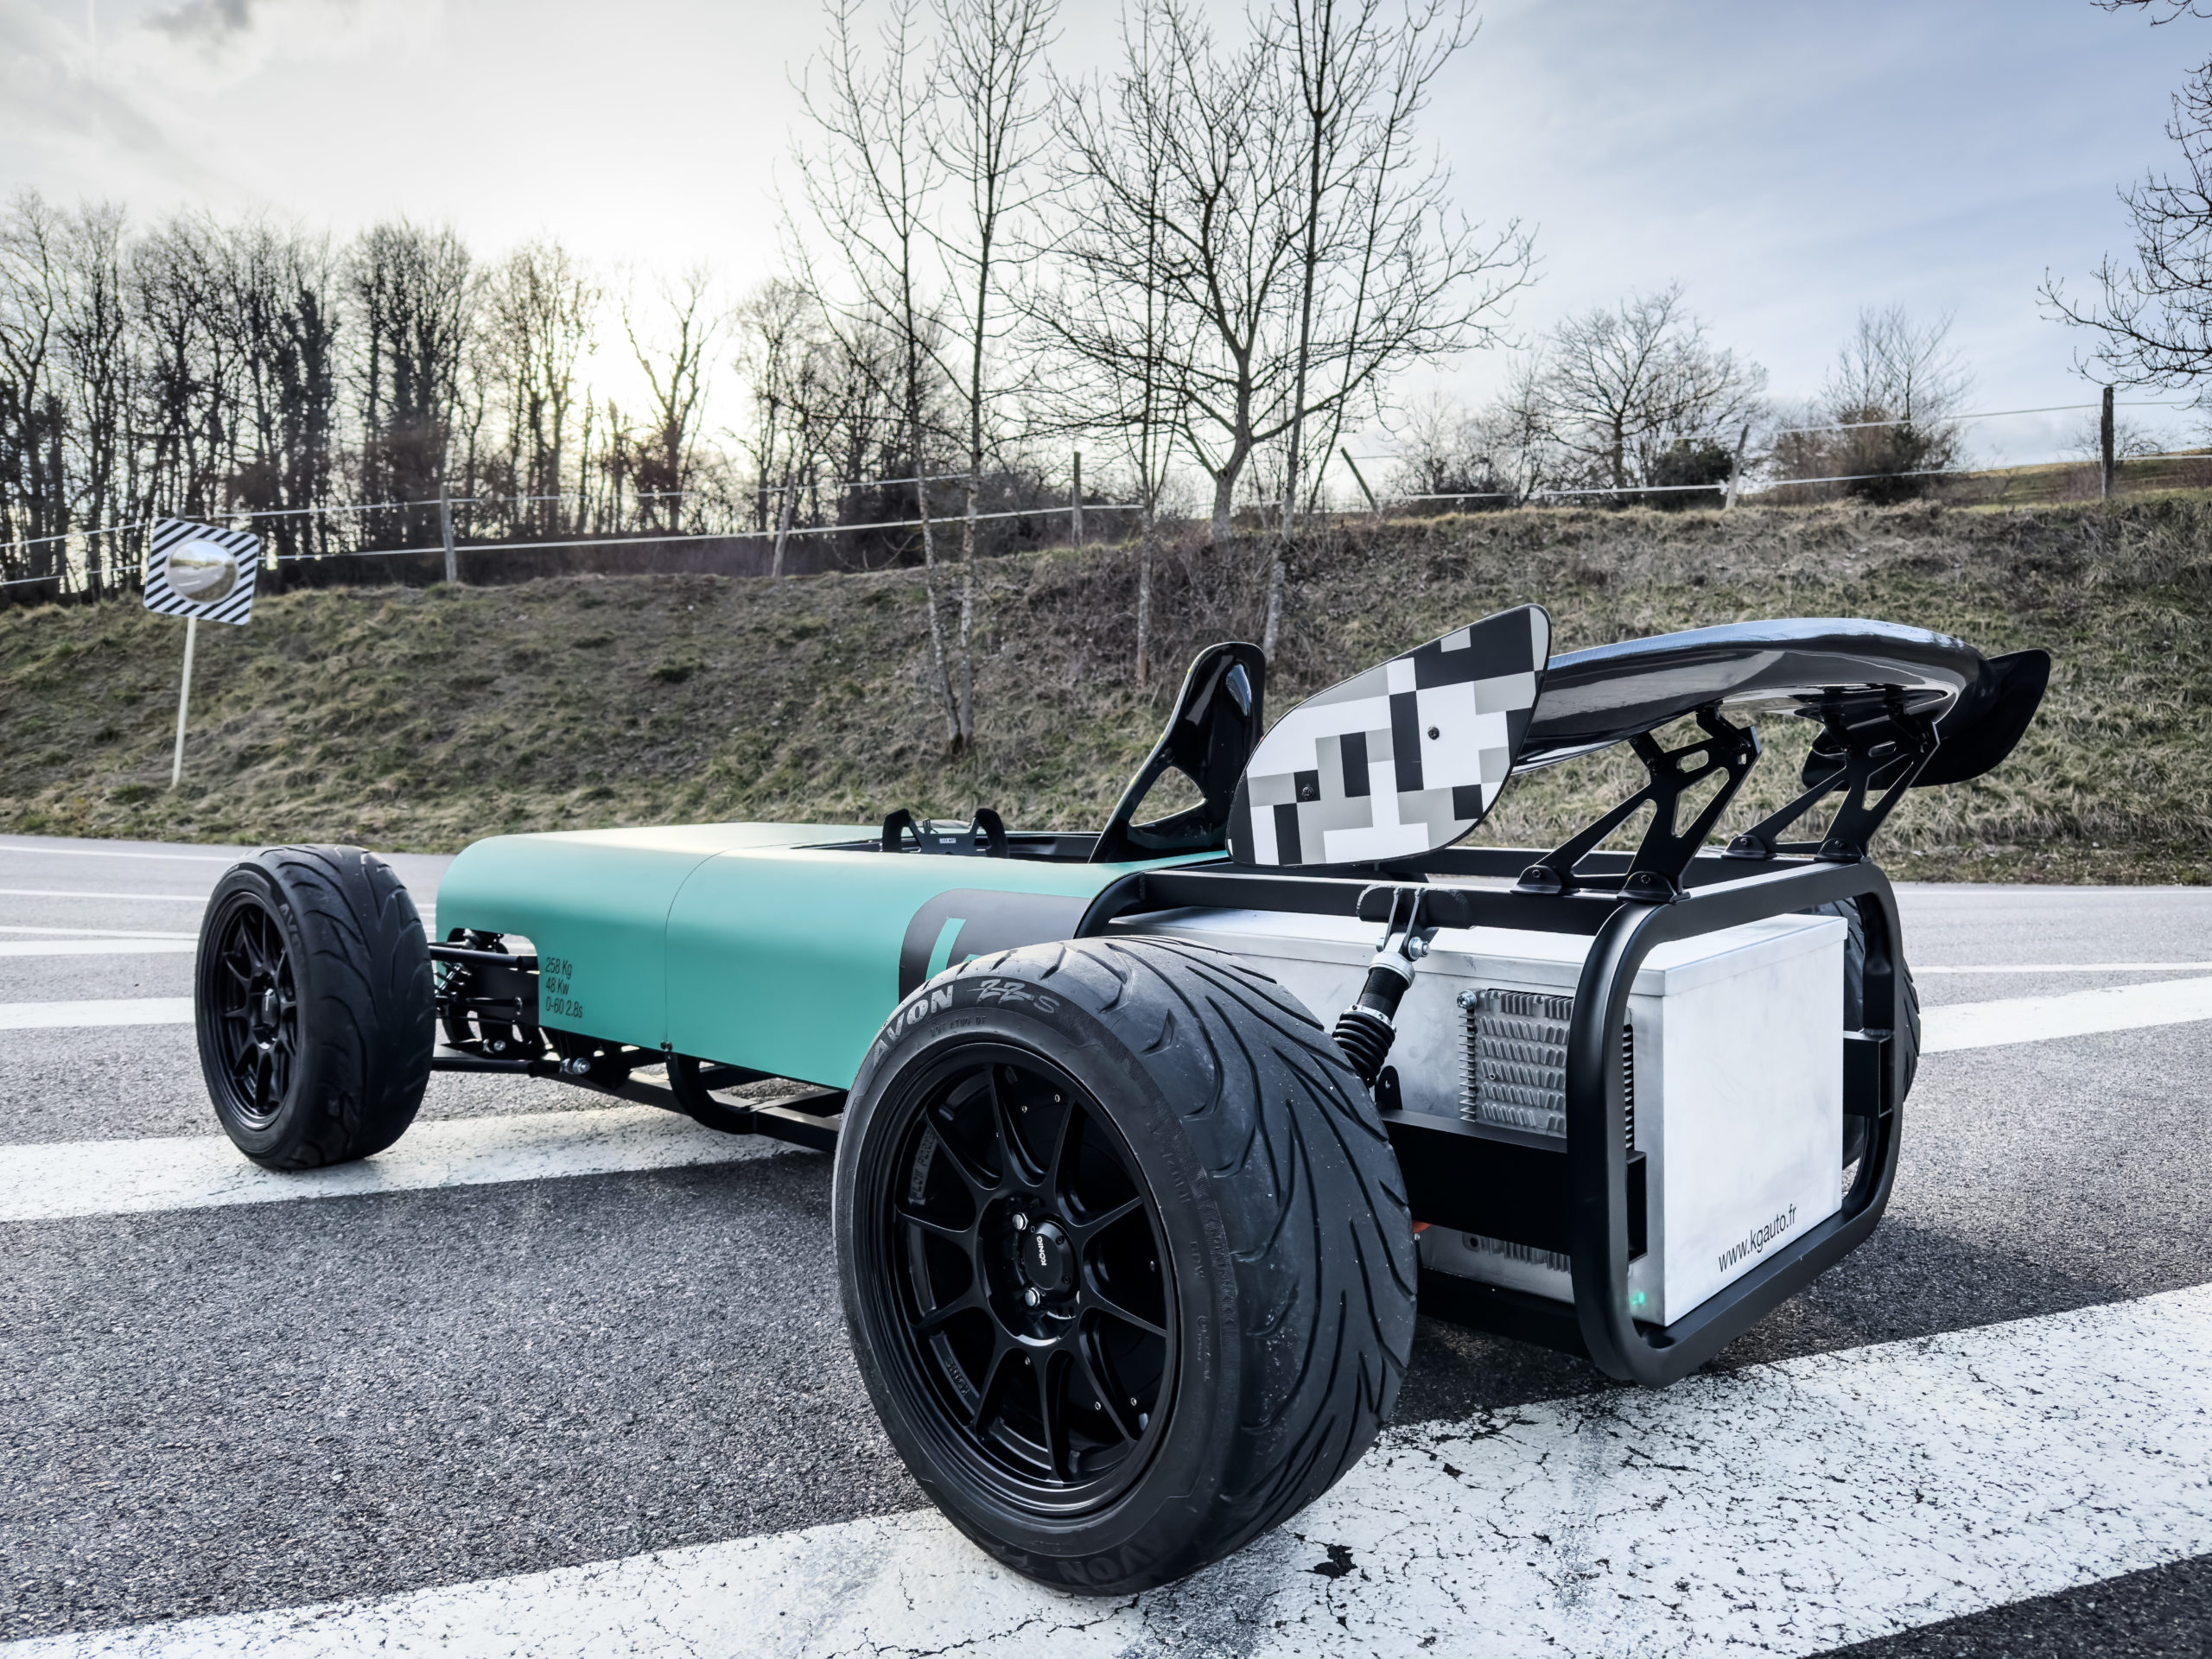 KG Auto’s flyweight Tube makes a Caterham look podgy